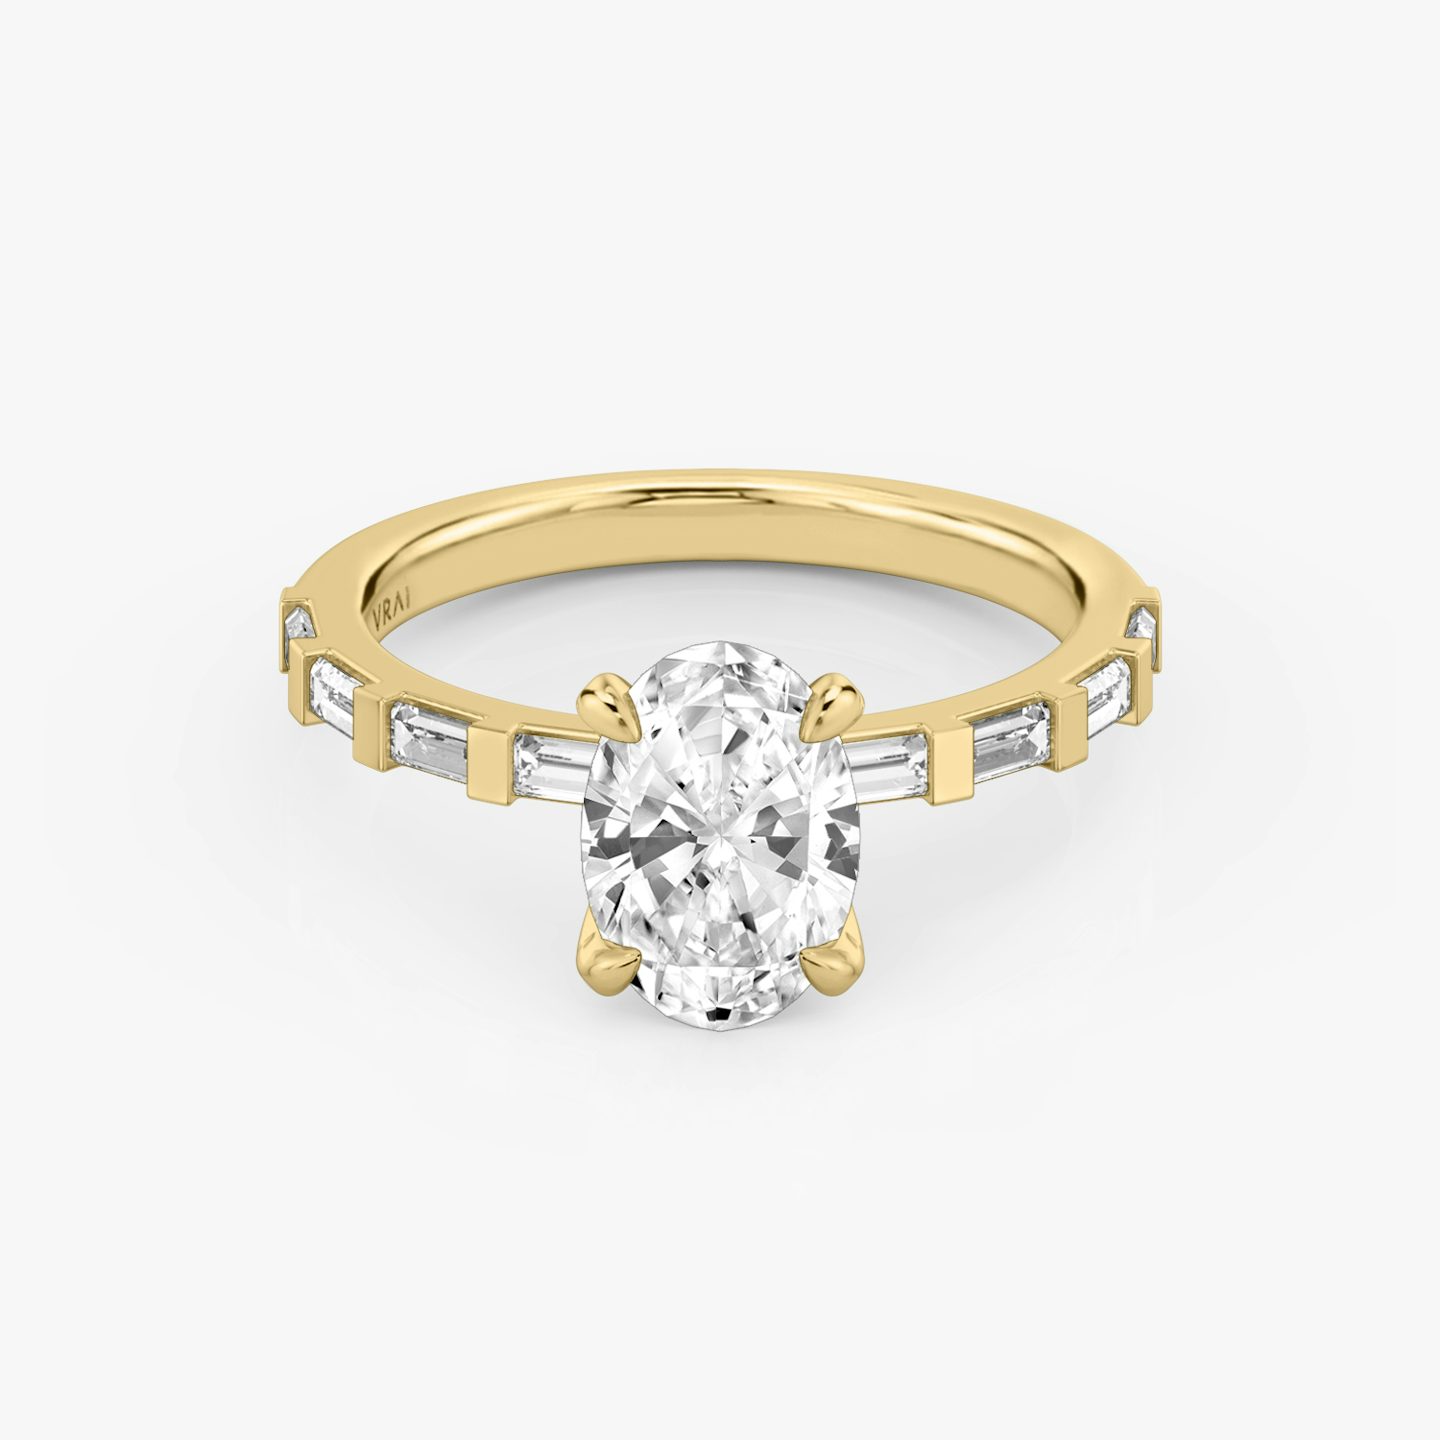 The Baguette Bar | Oval | 18k | 18k Yellow Gold | Diamond orientation: vertical | Carat weight: See full inventory